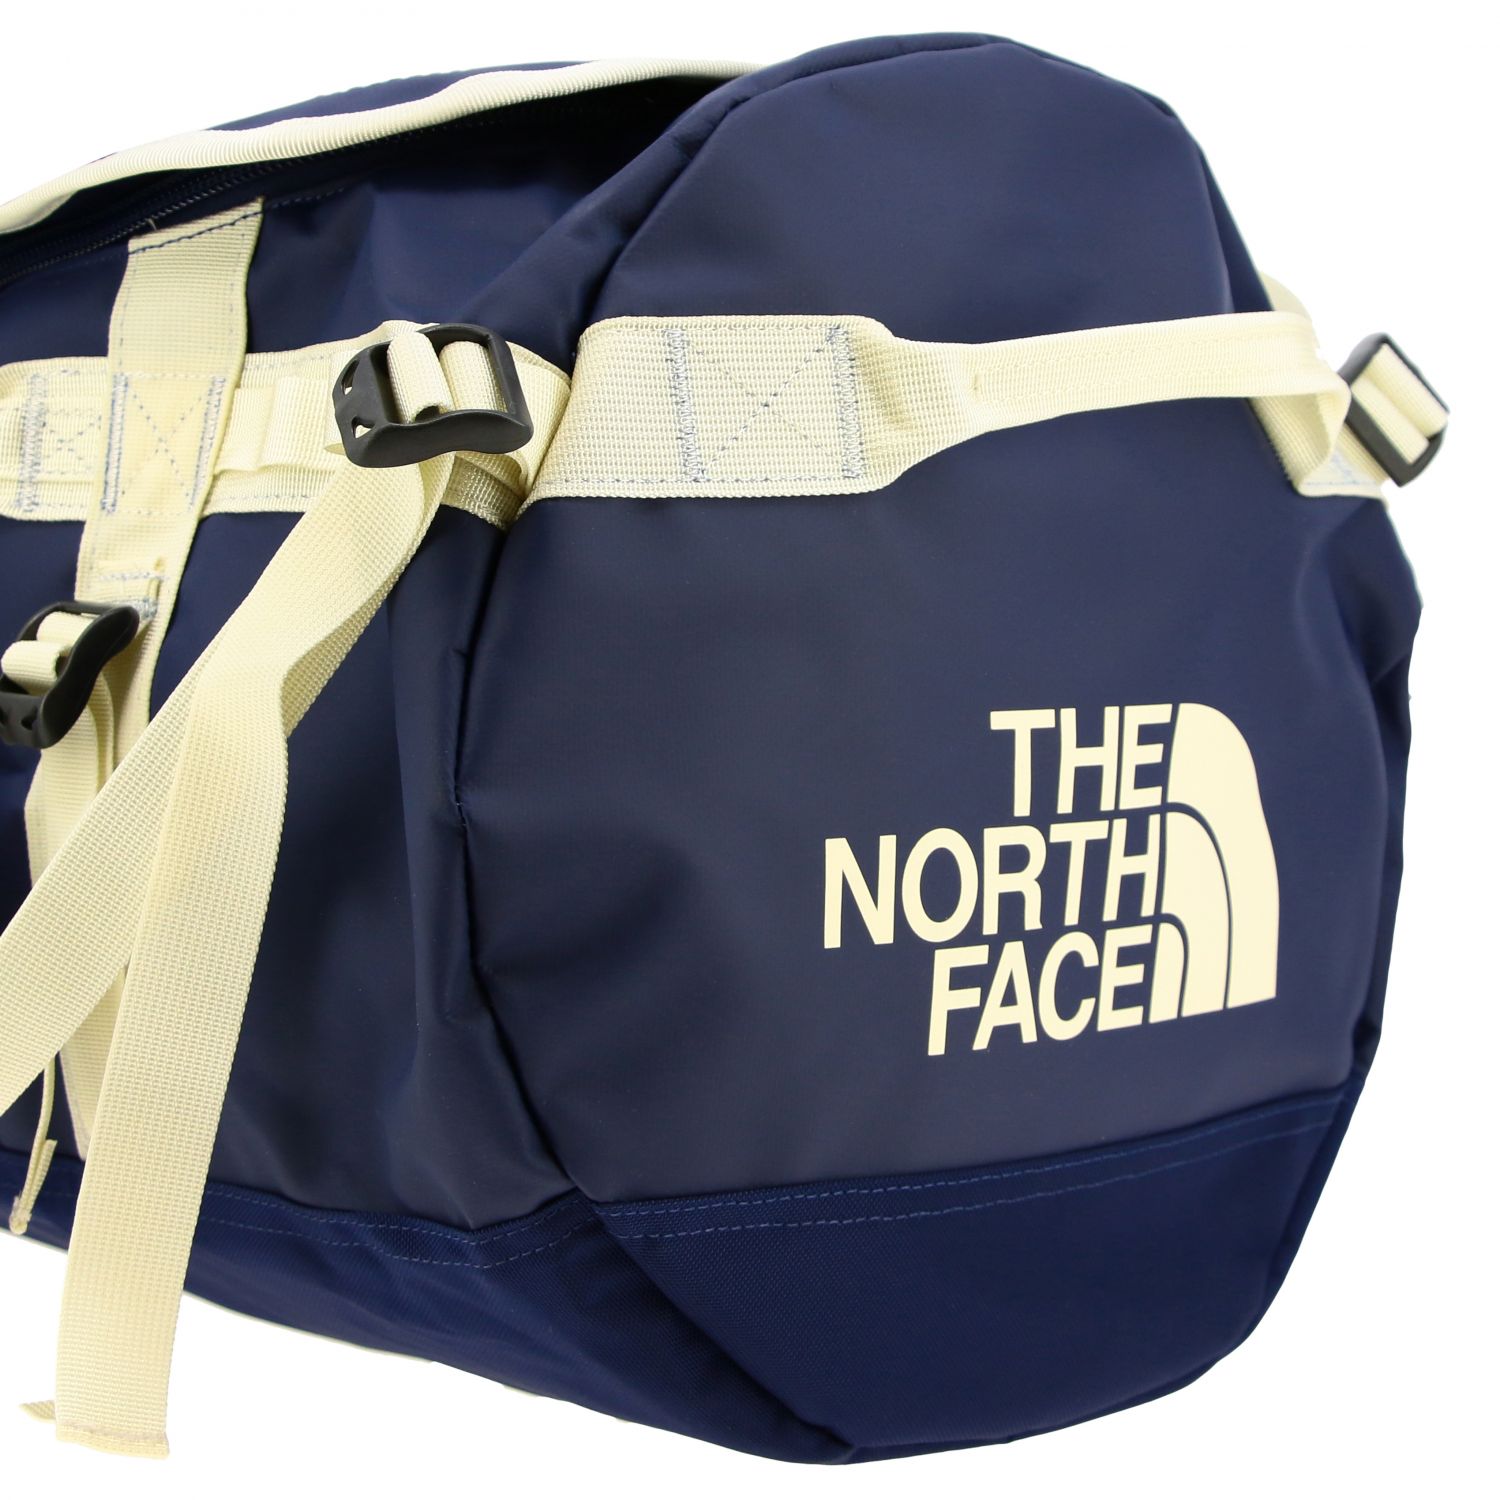 The North Face Outlet: 包男士- 蓝色| 手袋The North Face T93ETO GIGLIO.COM